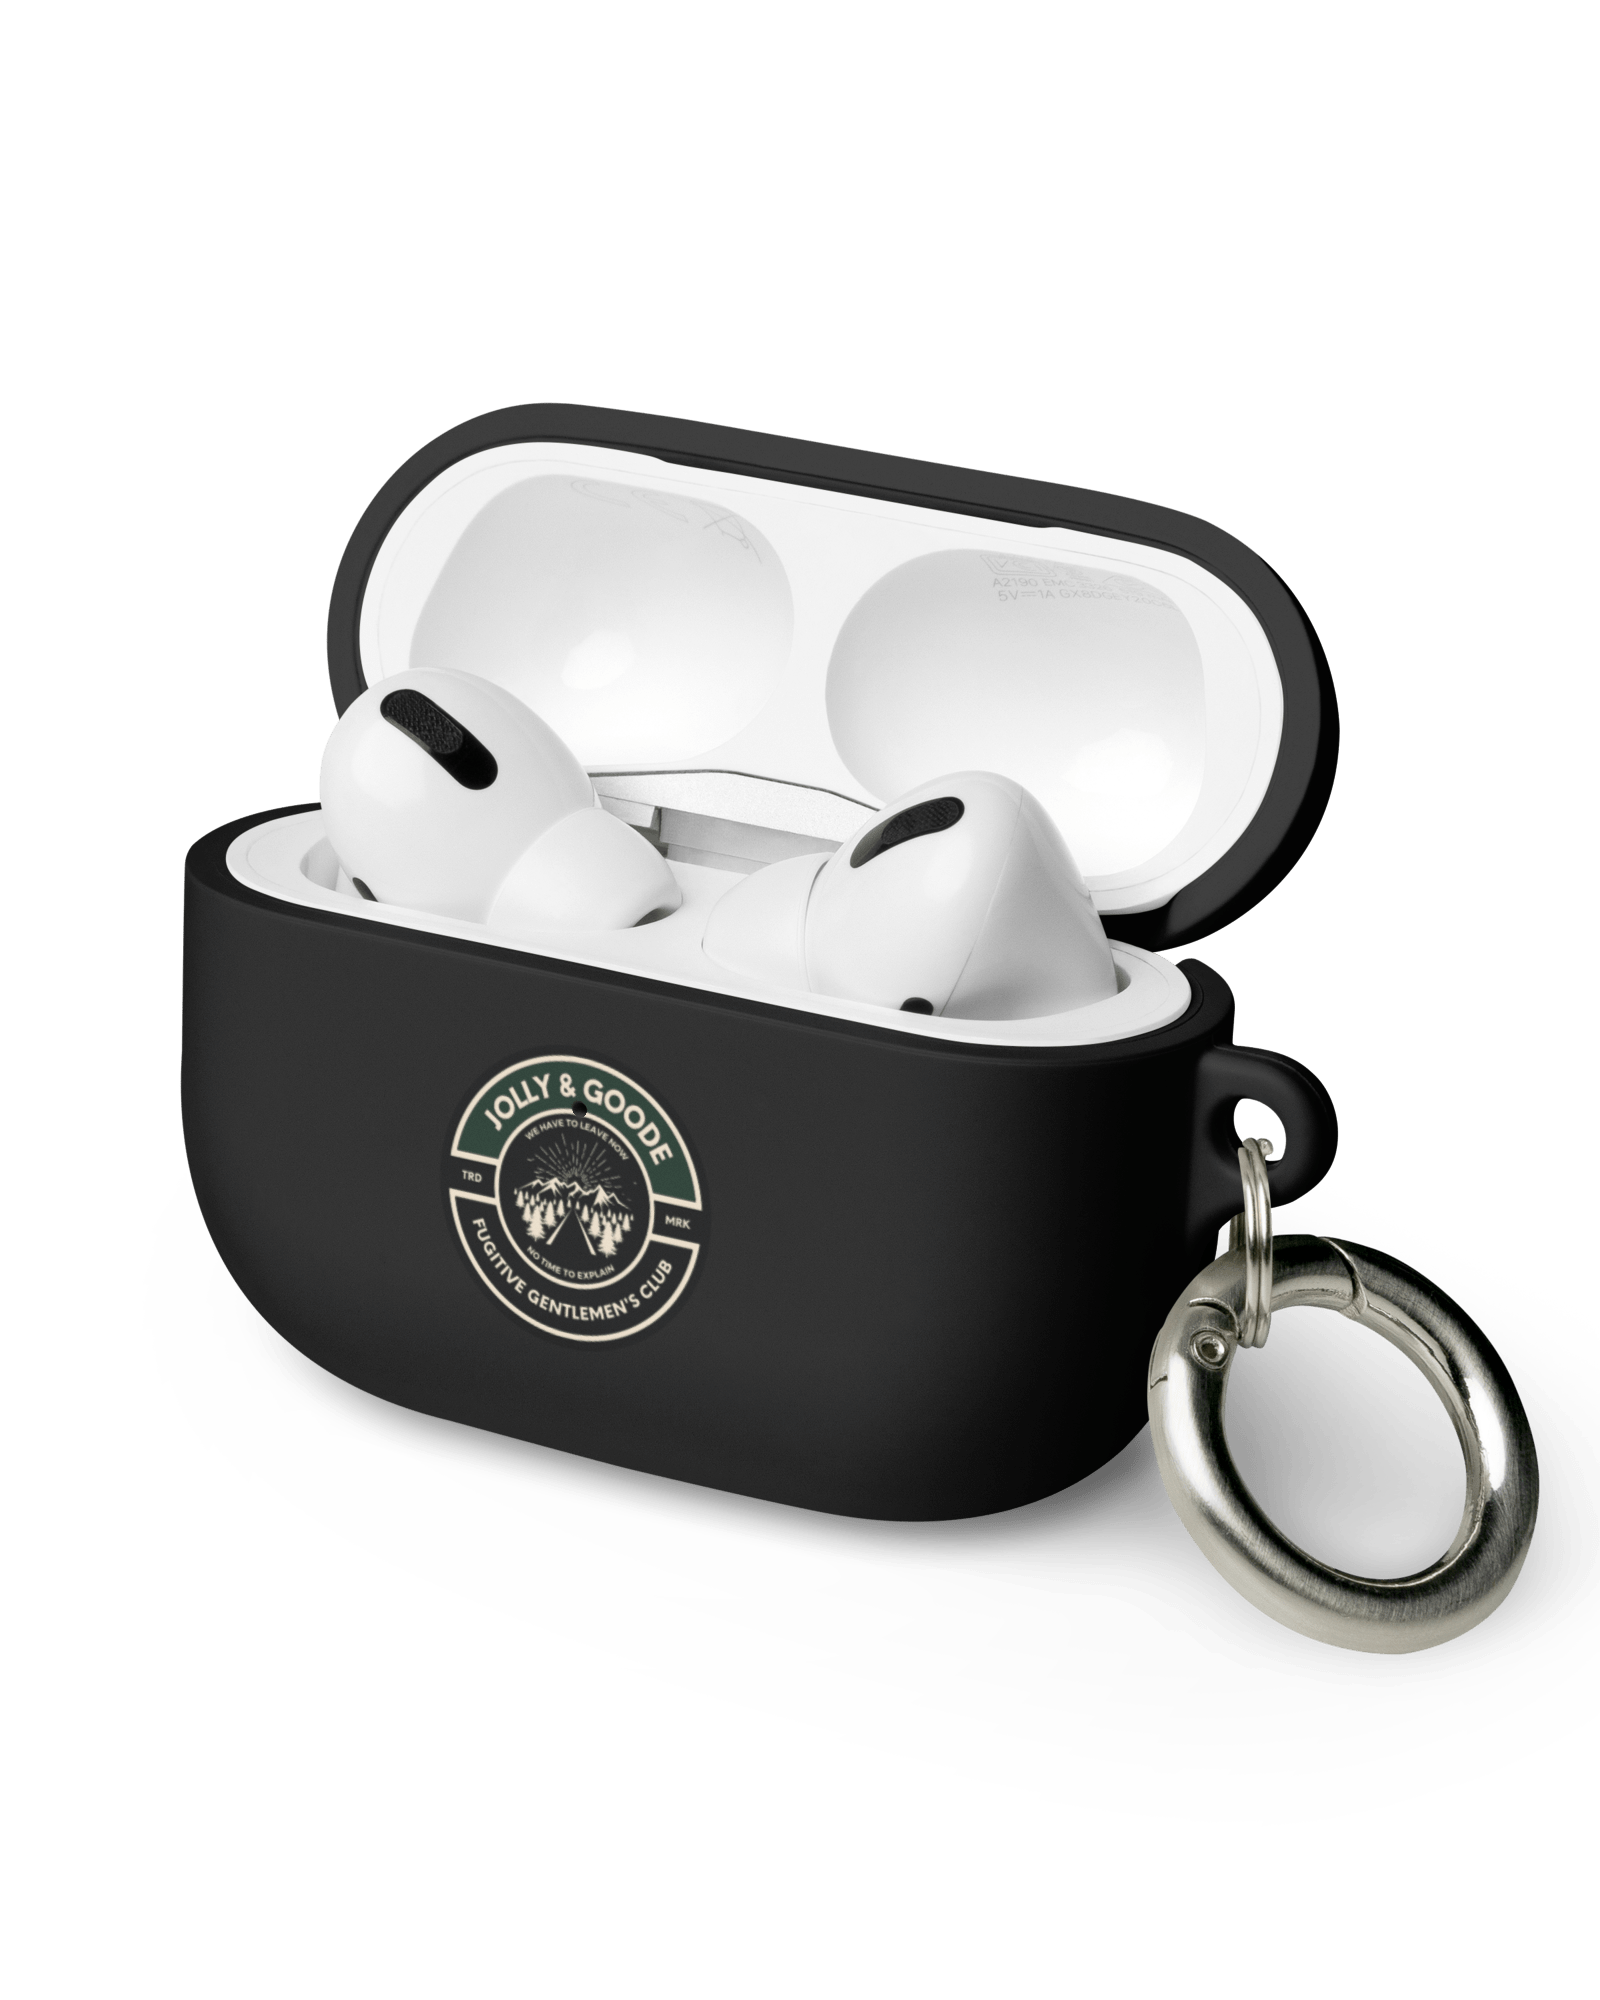 Fugitive Gentlemen's Club AirPods & AirPods Pro Case Black / AirPods Pro Jolly & Goode